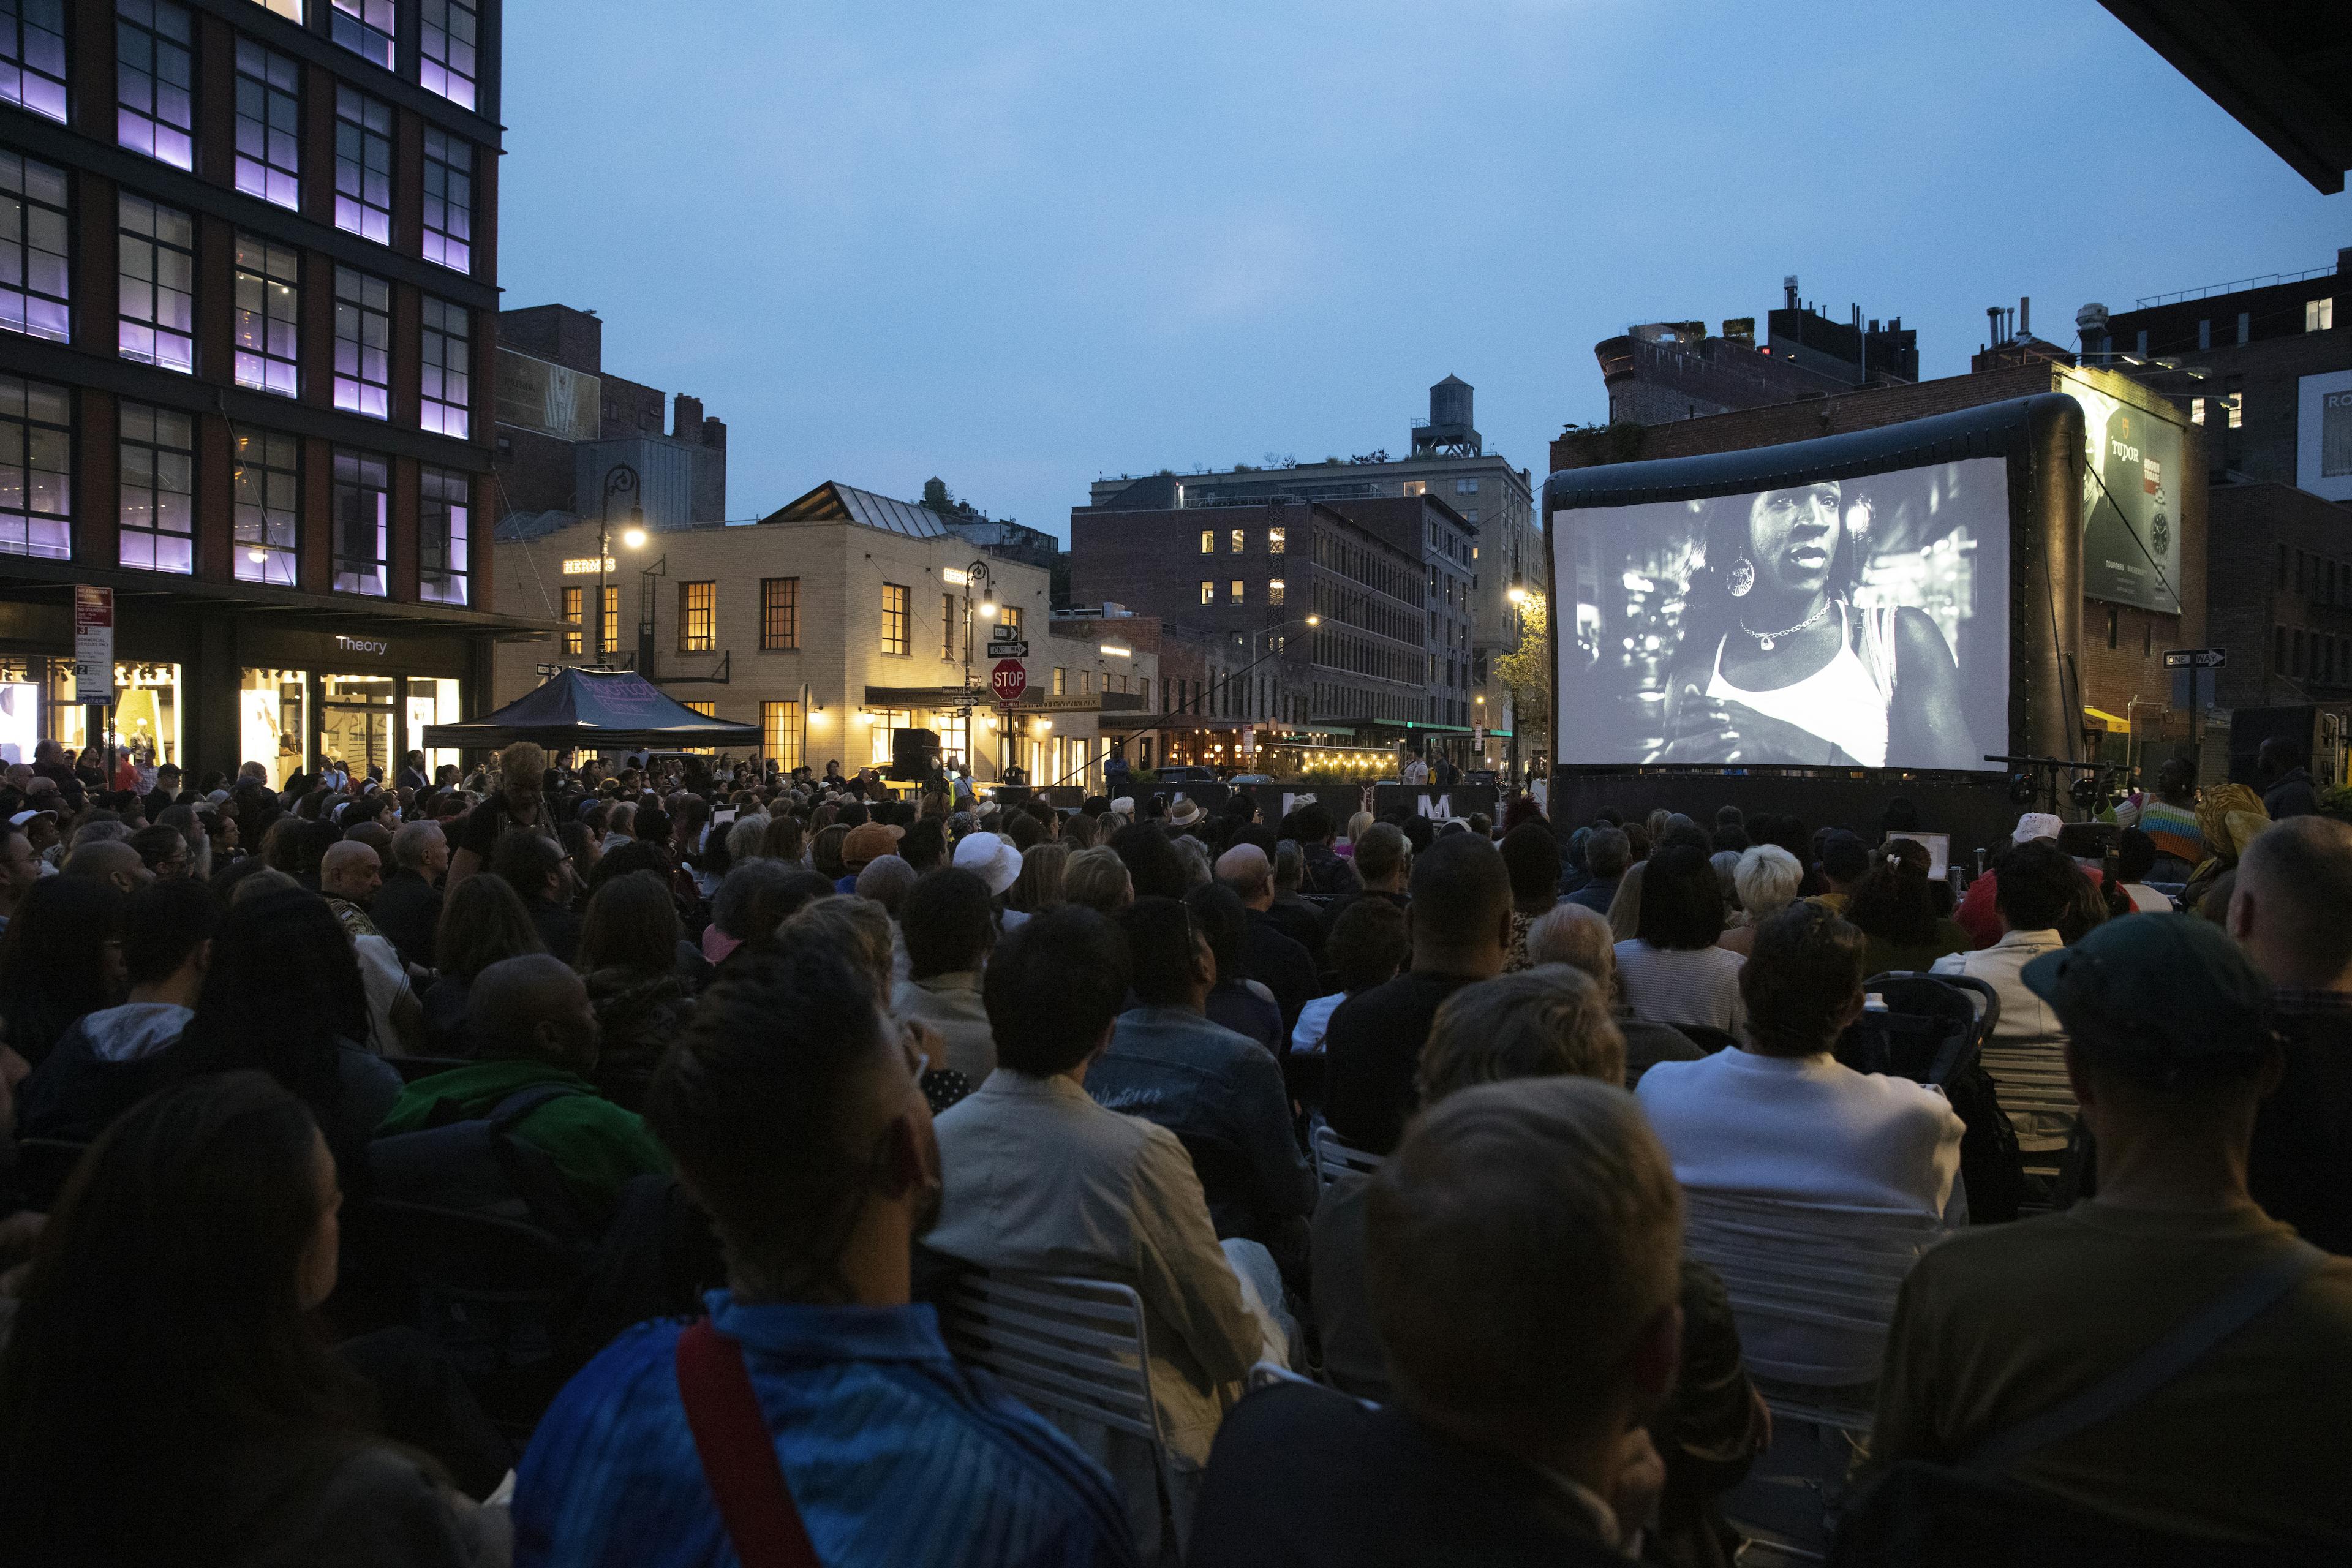 June's Movies in the Cobbles in Meatpacking